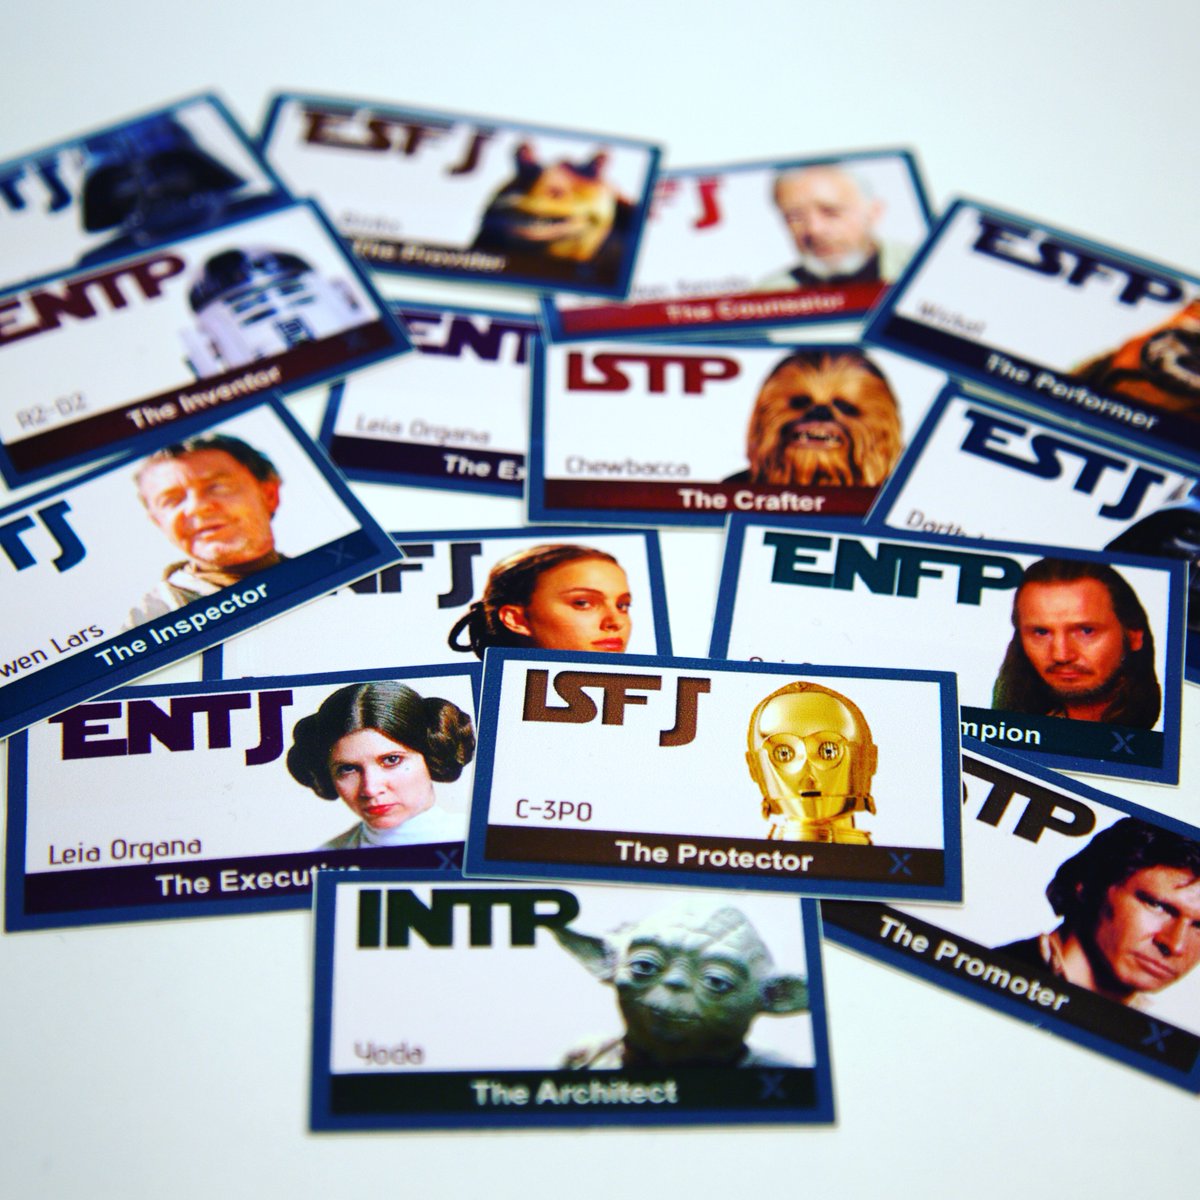 Where Do You Fall on the Star Wars Myers Briggs?